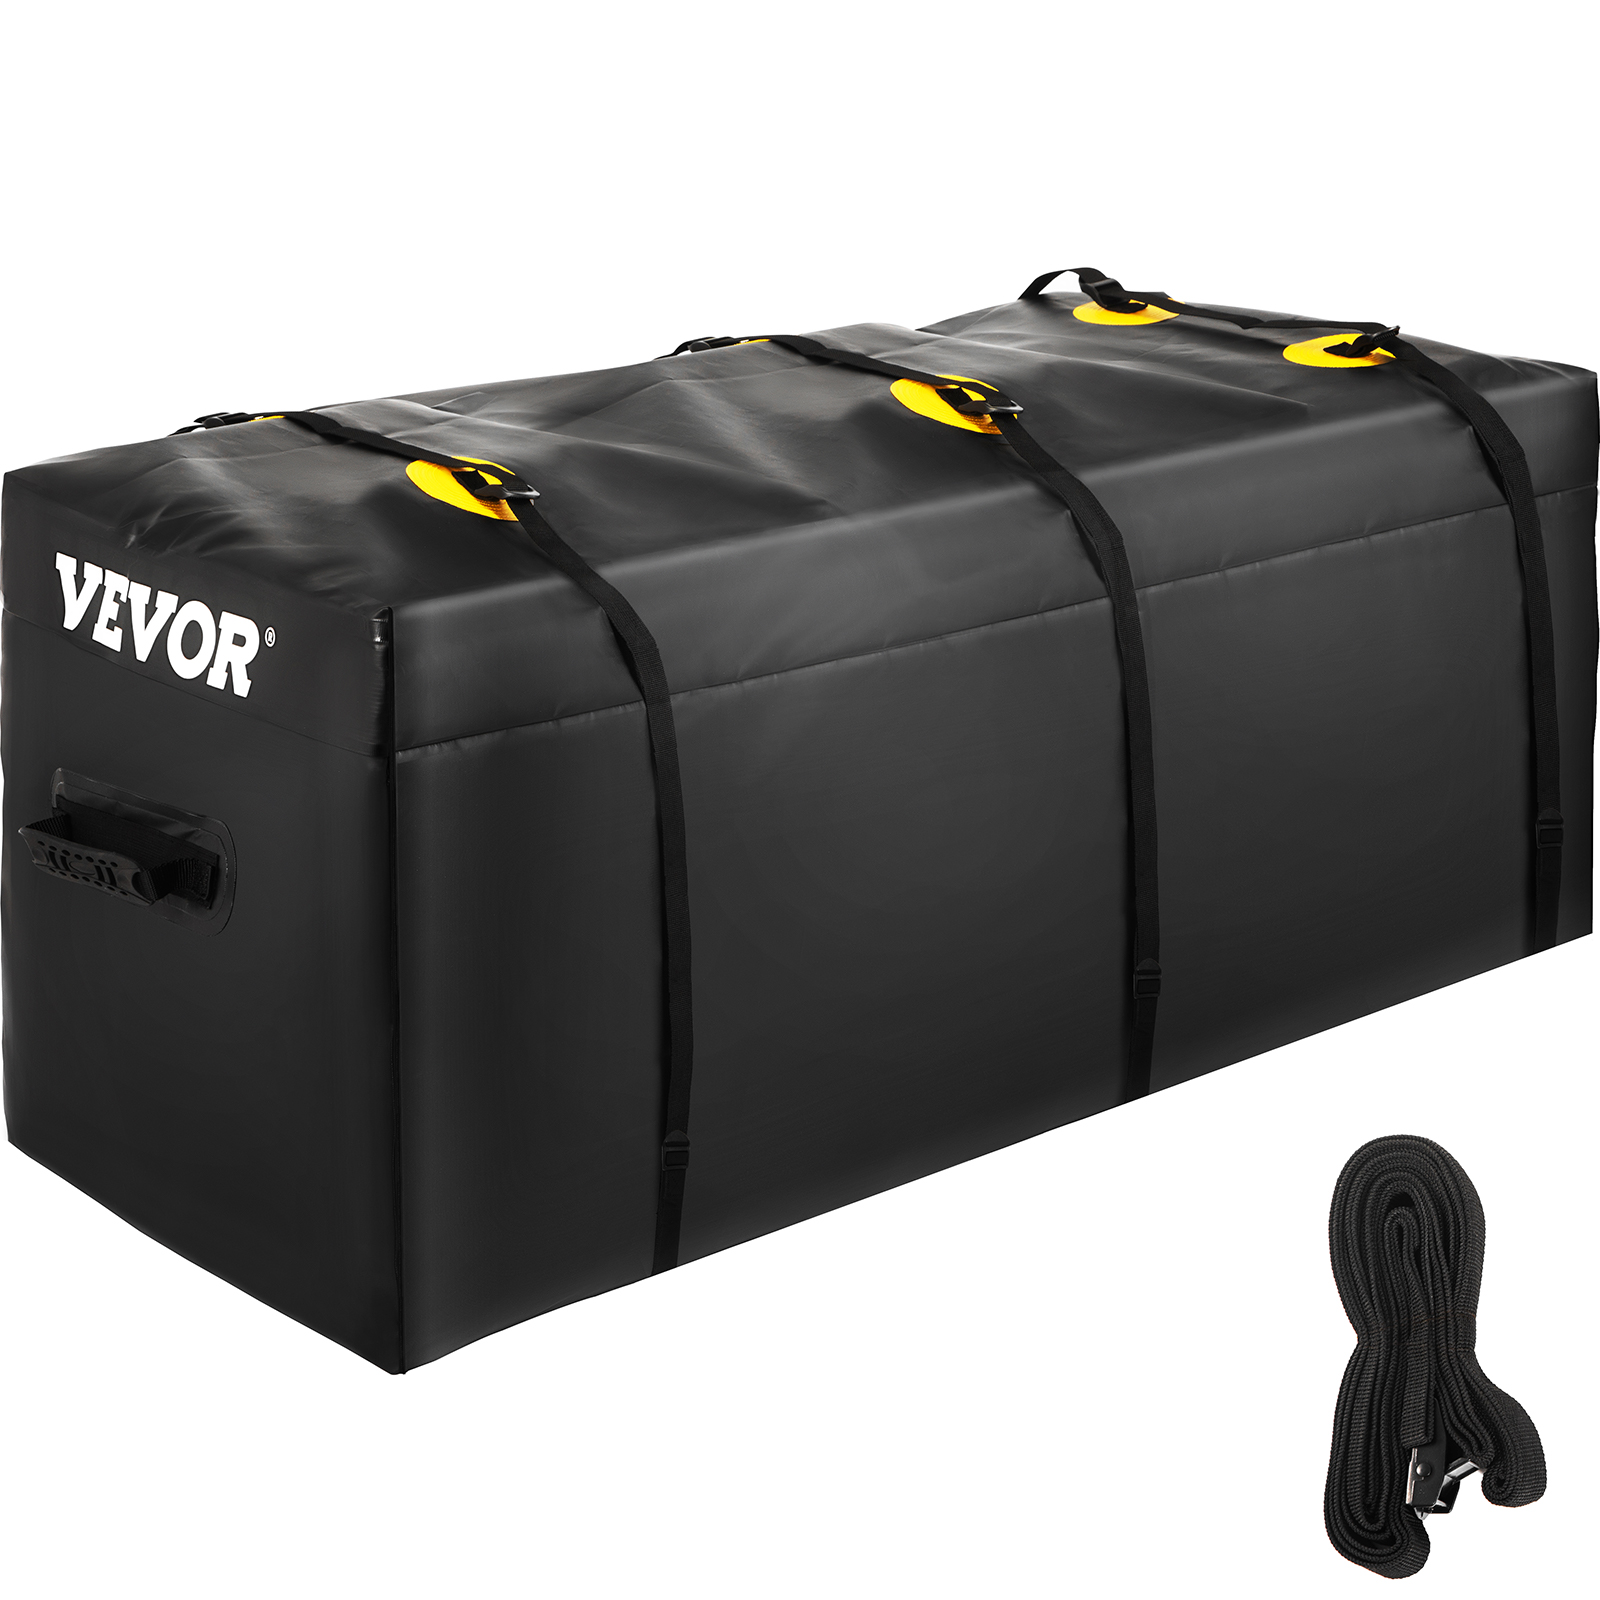 VEVOR Hitch Cargo Carrier Bag, Waterproof 840D PVC, 48x20x22 (12 Cubic  Feet), Heavy Duty Cargo Bag for Hitch Carrier with Reinforced Straps, Fits Car  Truck SUV Vans Hitch Basket